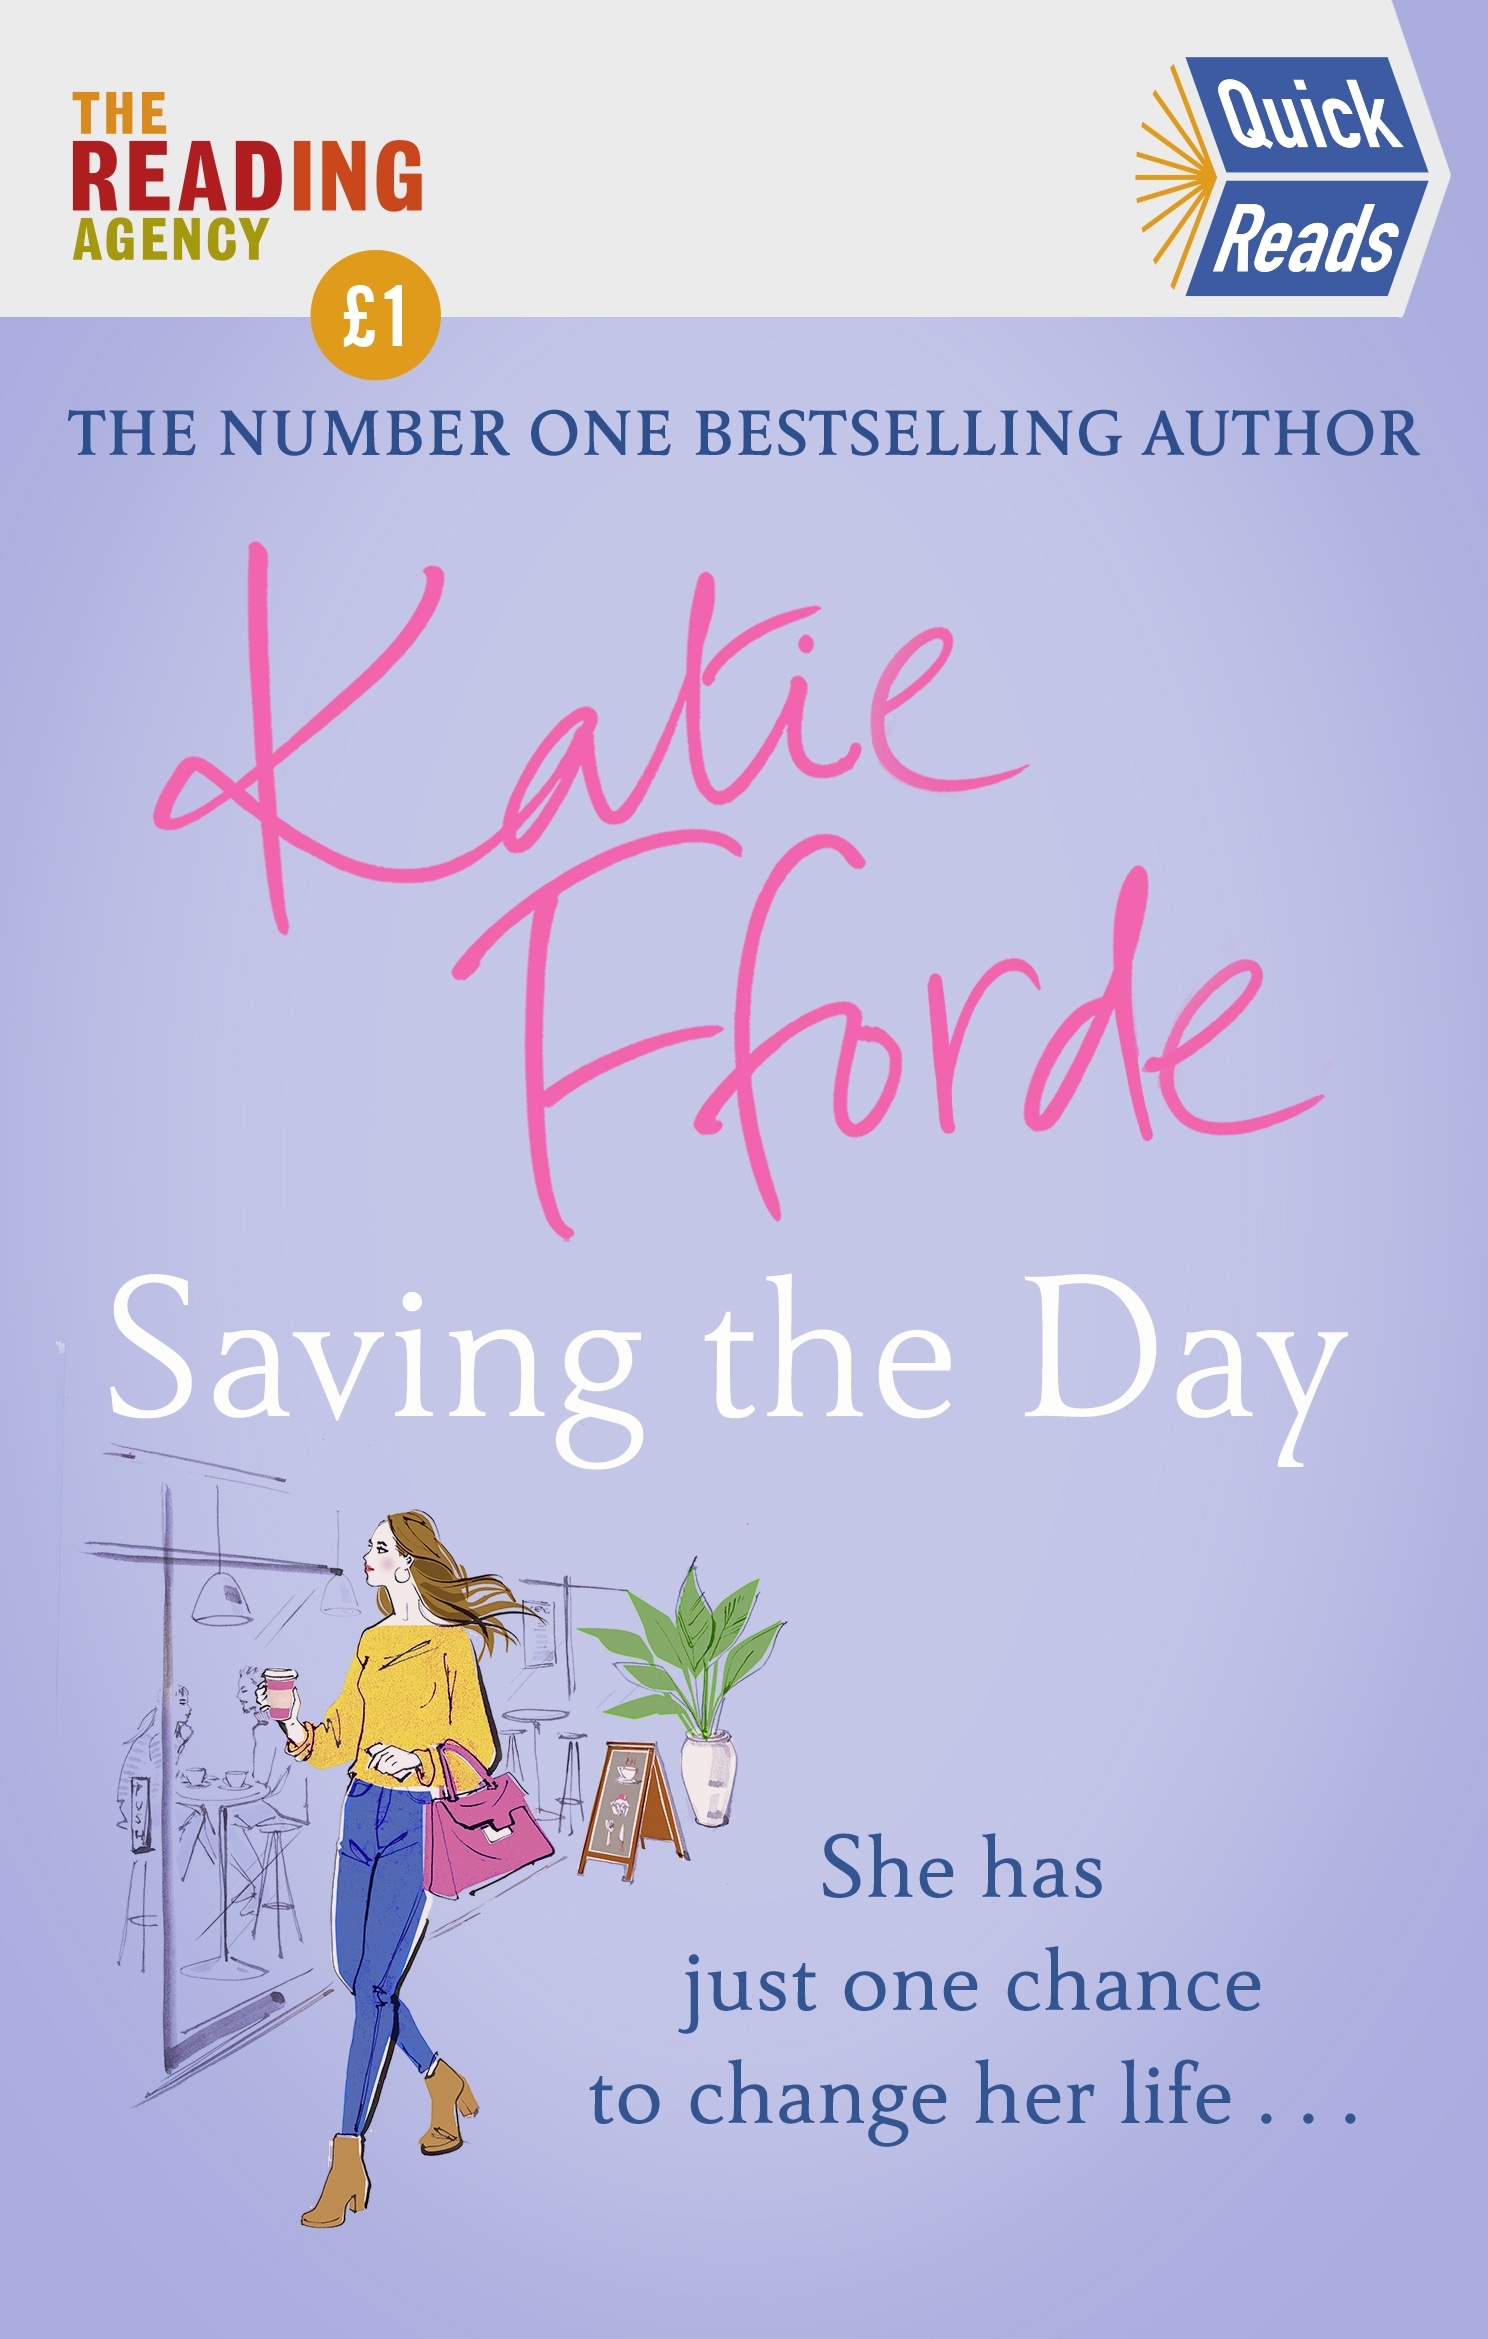 Book “Saving the Day (Quick Reads 2021)” by Katie Fforde — May 27, 2021